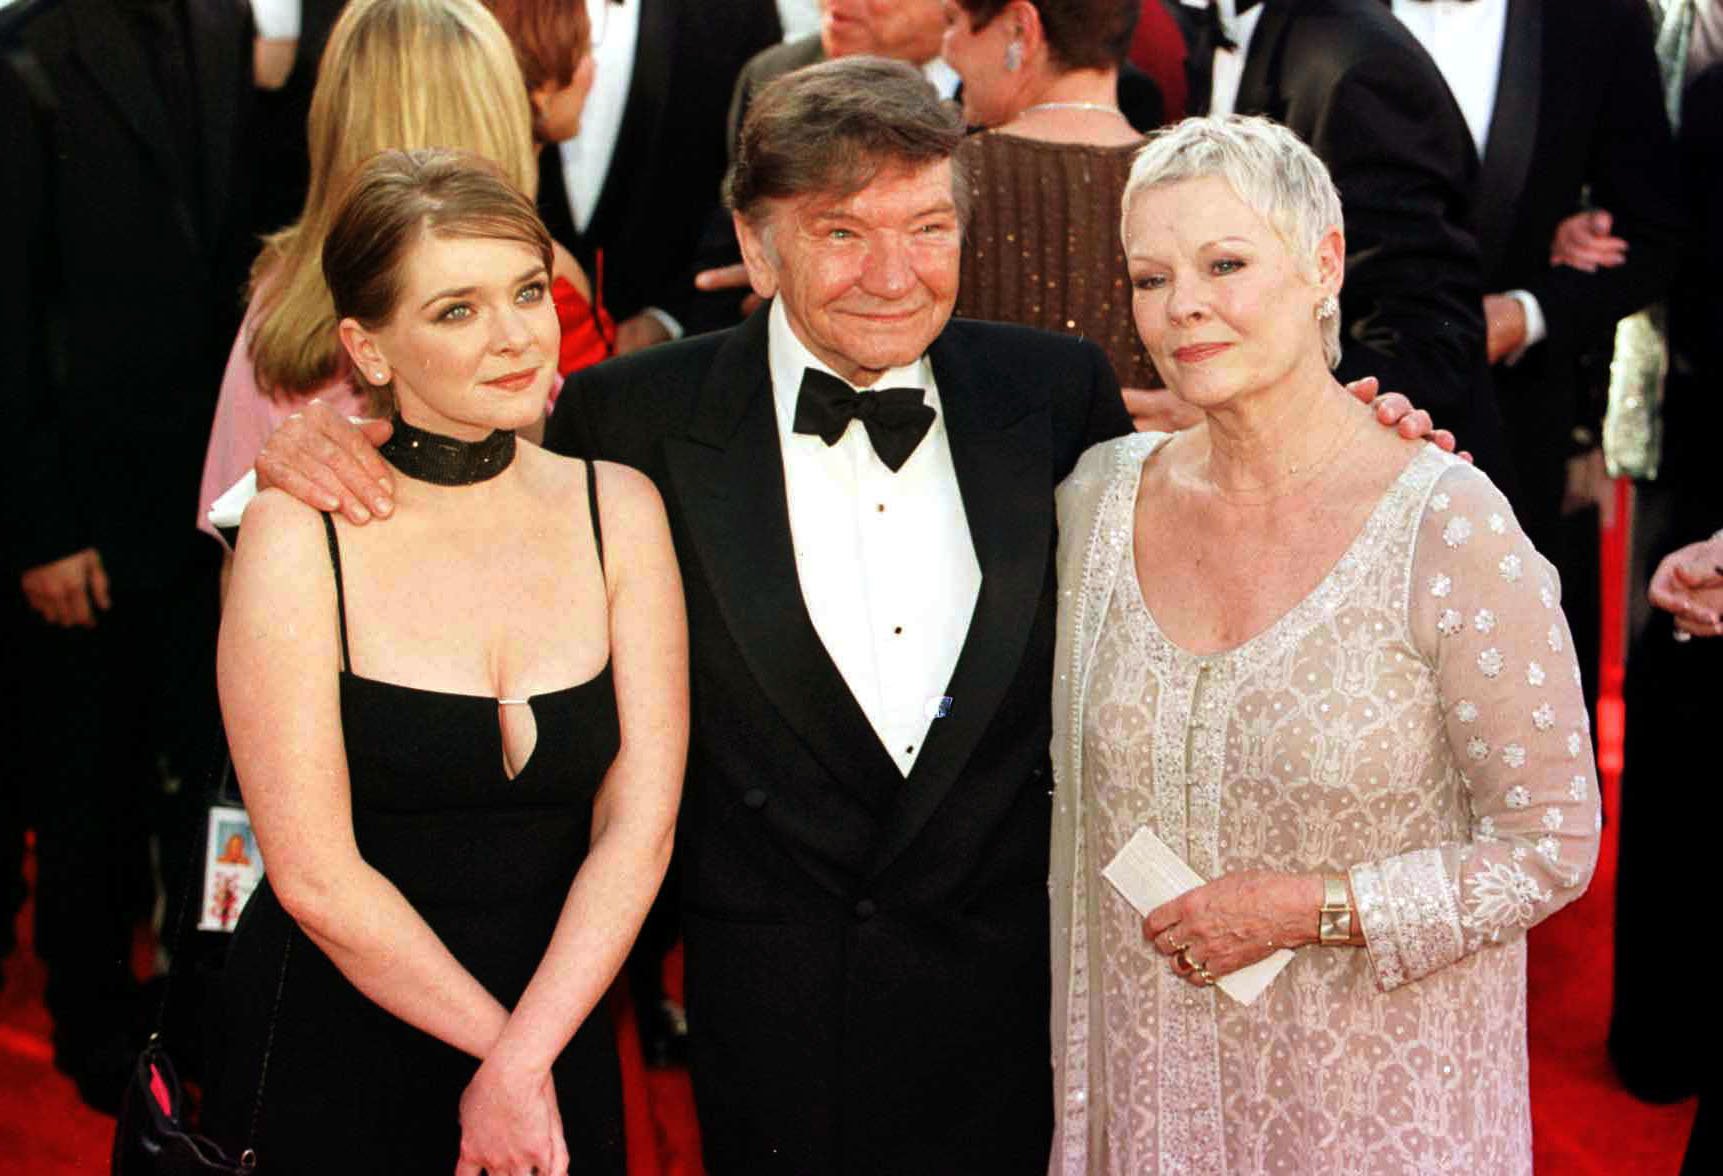 Dame Judi Dench with her husband, Michael Williams and daughter Finty Williams, arrive for the 72nd Annual Academy Awards at the Shrine Auditorium in Los Angeles, USA | Source: Getty Images 